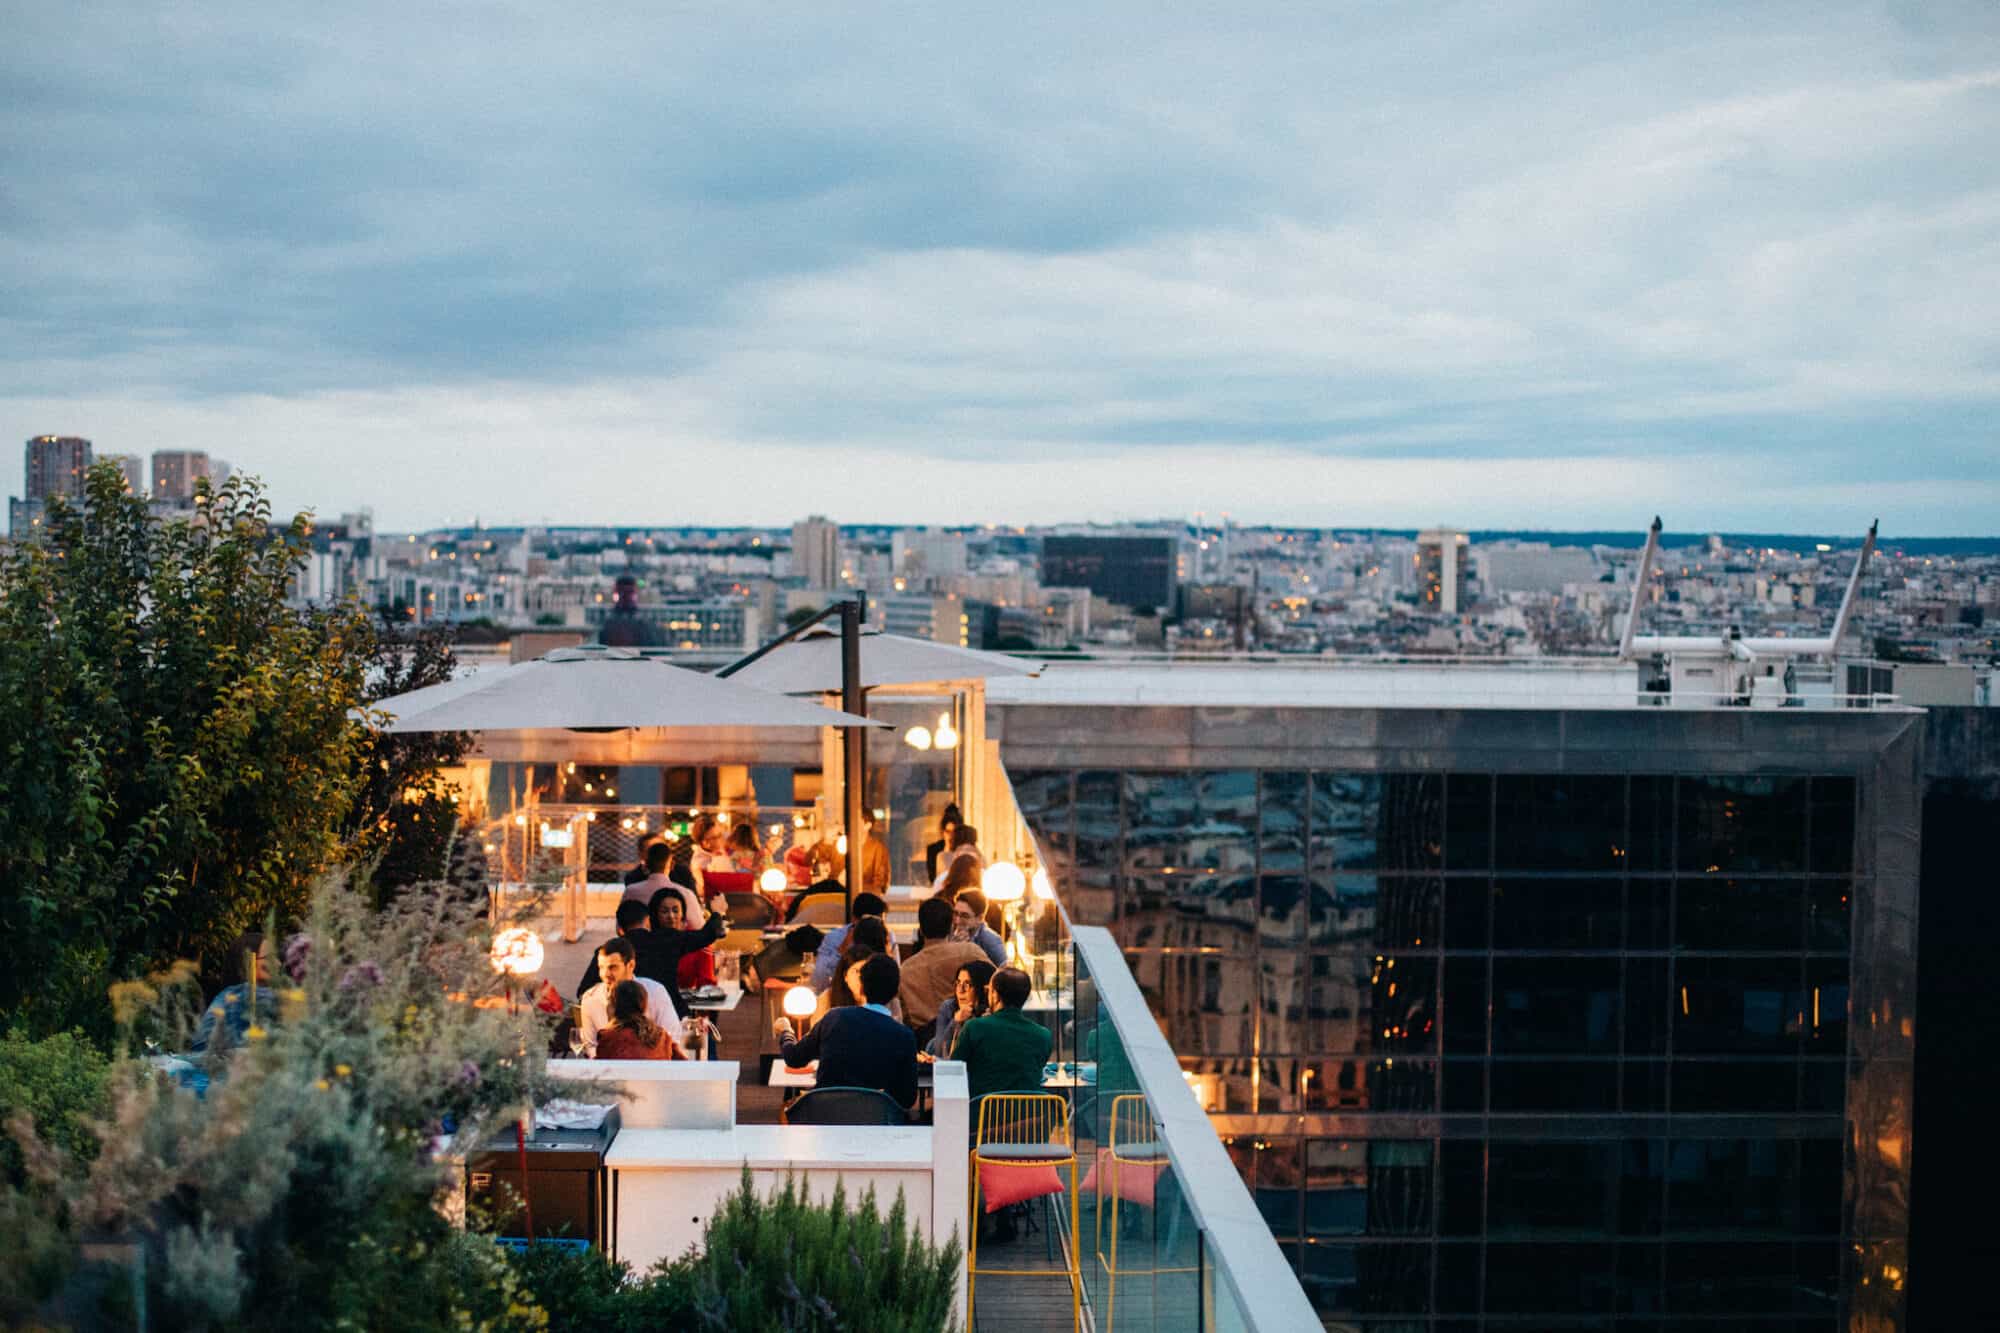 The terrace of the rooftop bar Laho. It is dusk and there are people seated at tables. The lights are on and they are seated underneath umbrellas. There are some trees and plants on the left. In the background you can see a view of Paris under a grey, cloudy sky.